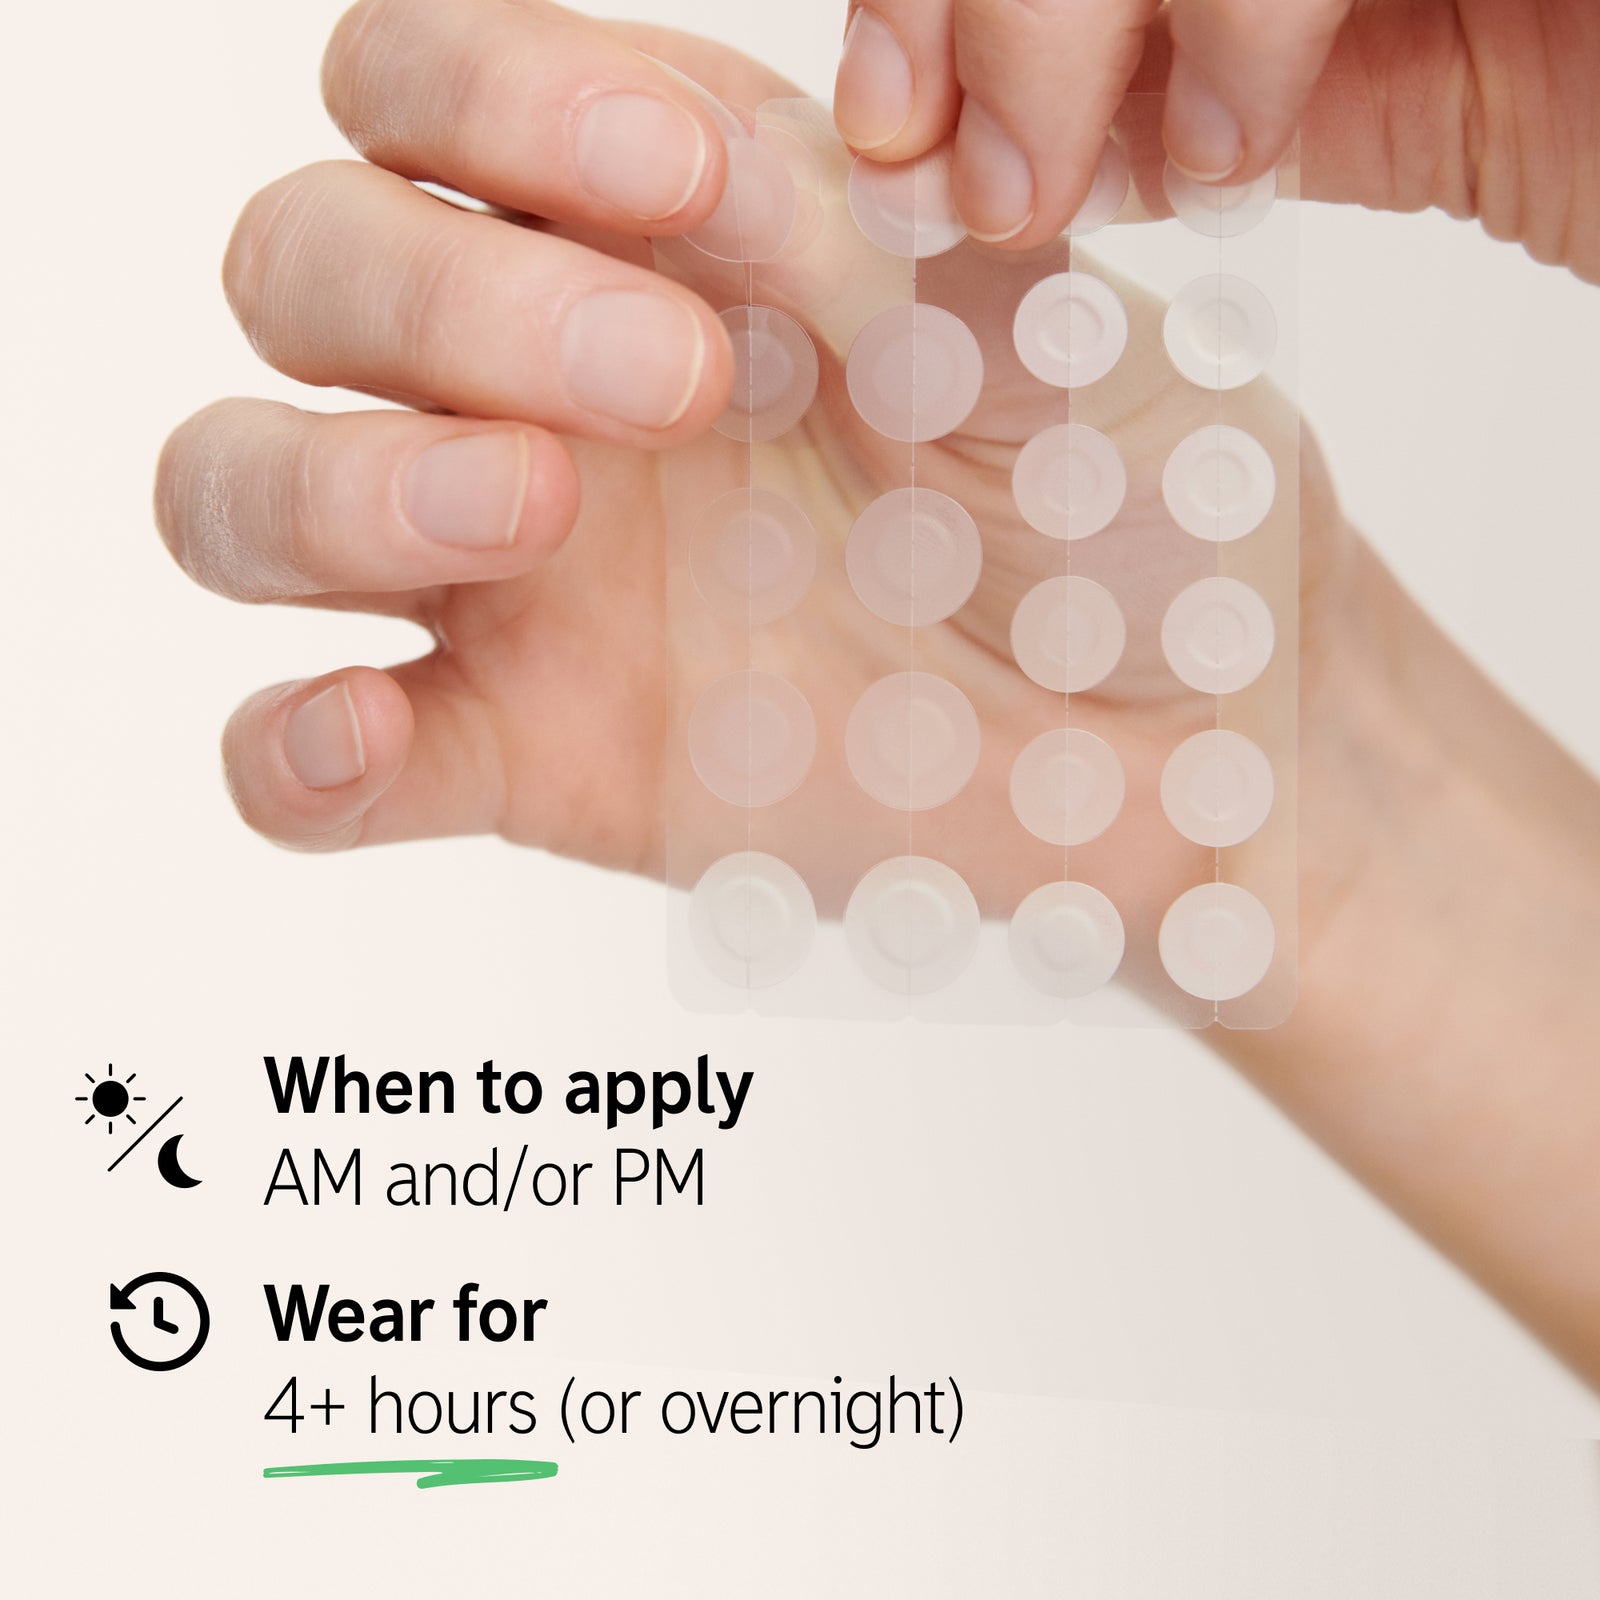 When to use Pimple Patch: AM/and or PM, 4+ hours or overnight